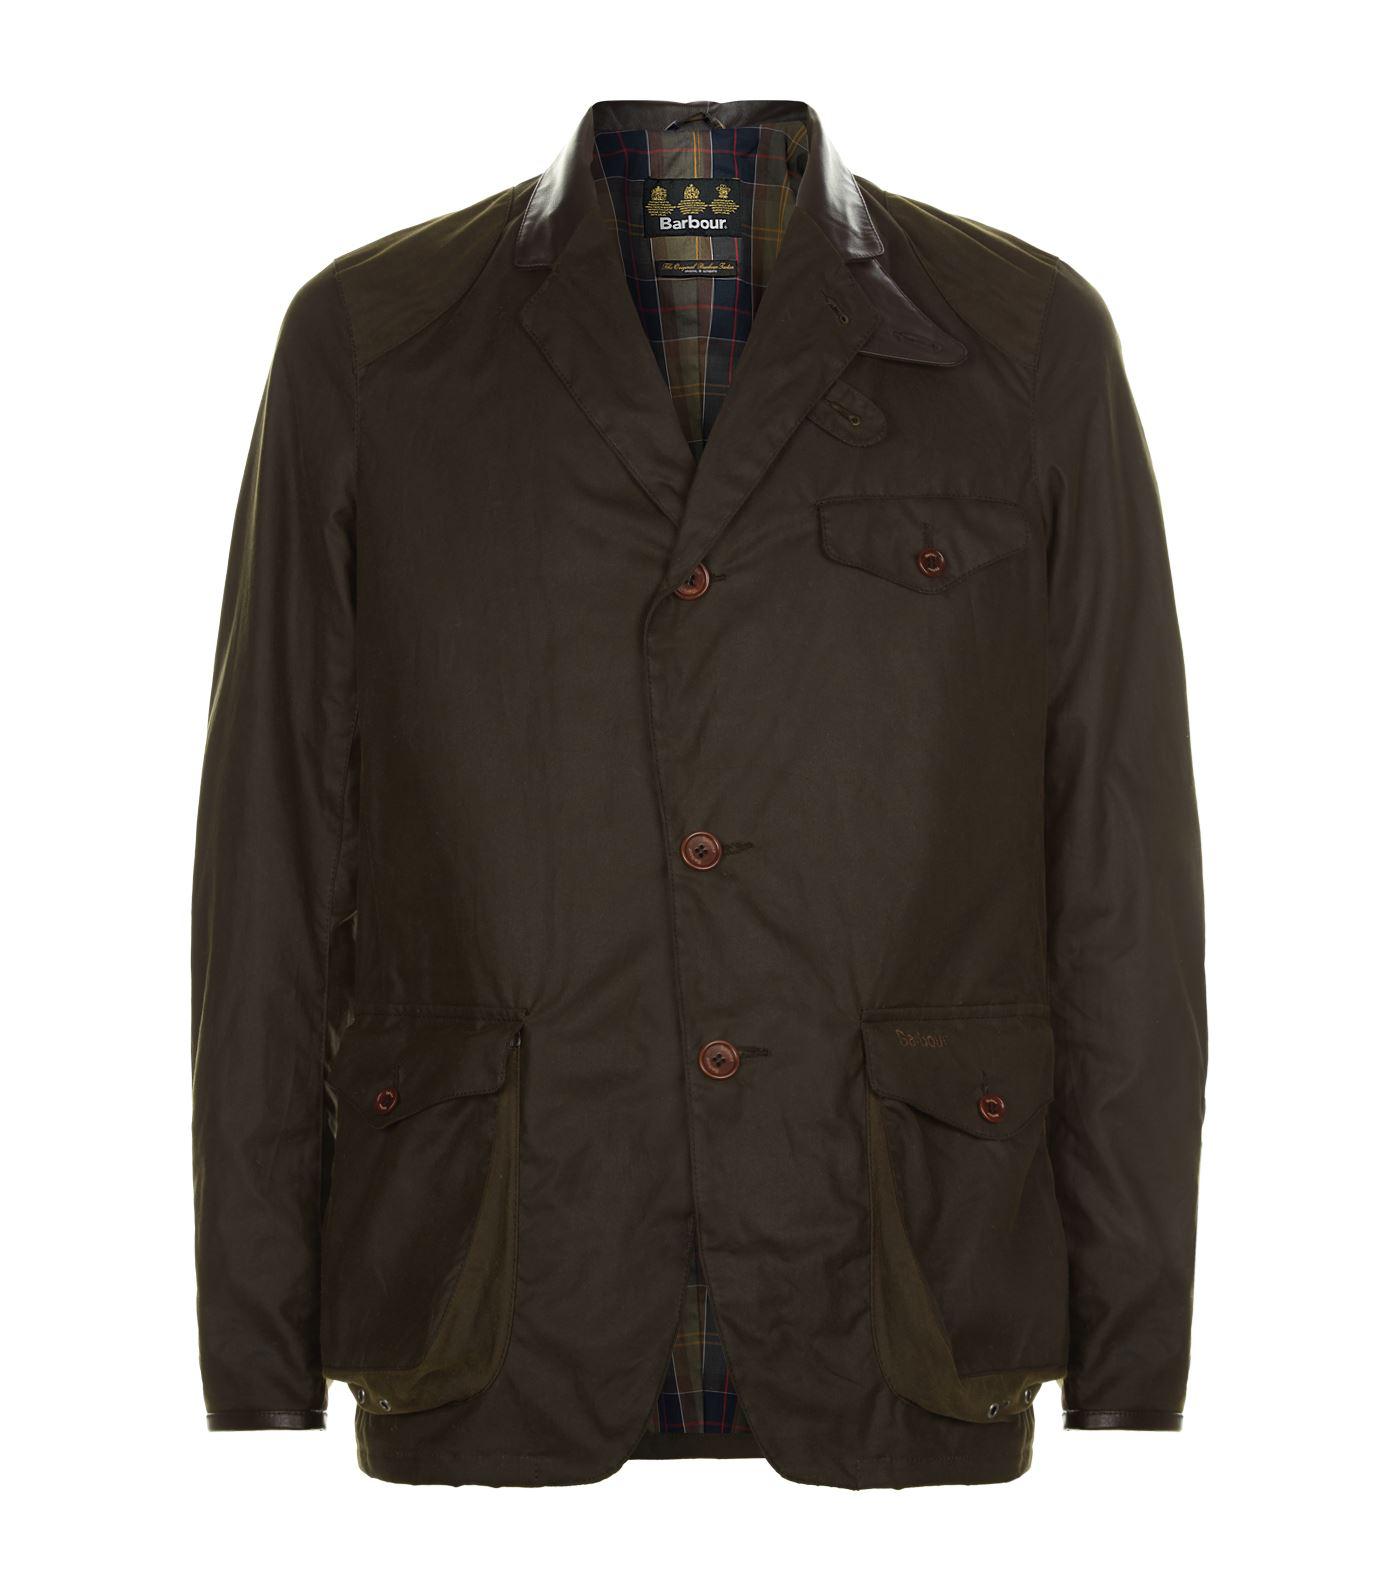 Lyst - Barbour Heritage Beacon Sports Jacket in Green for Men